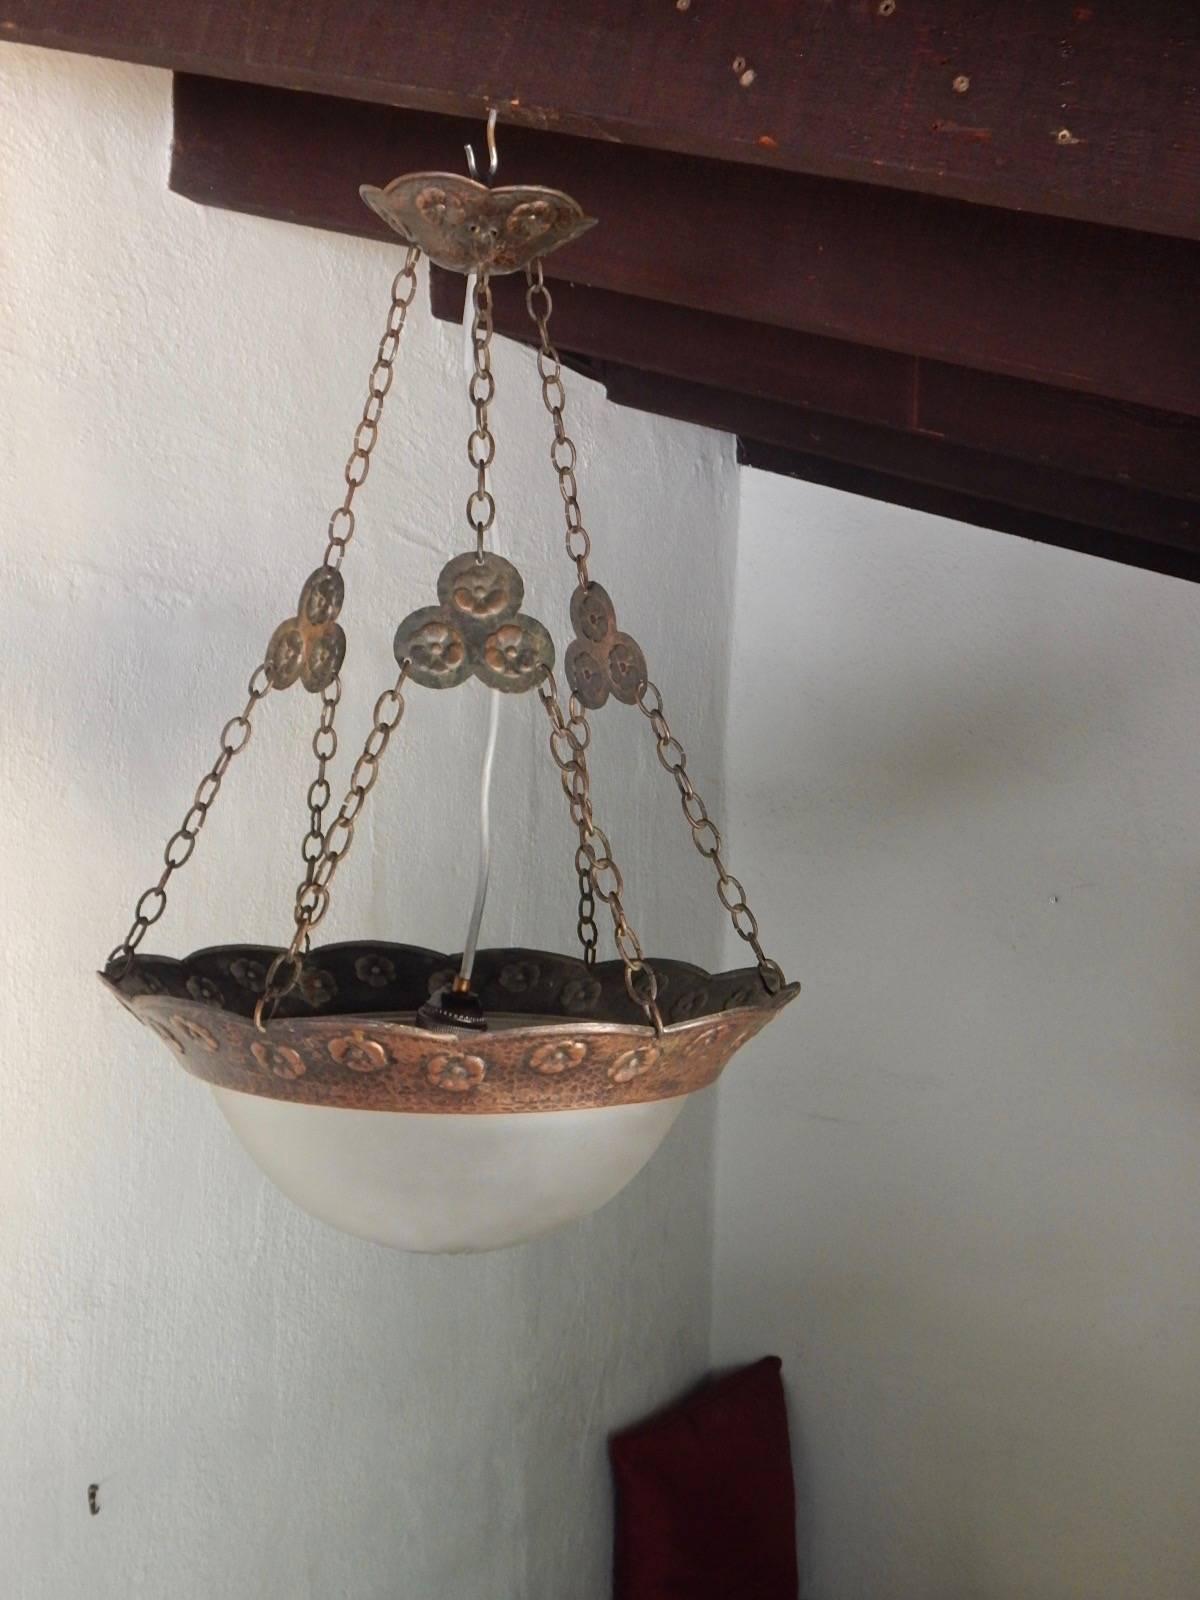 Swedish Arts & Crafts Hammered Copper Hanging Light Fixture, circa 1910 In Excellent Condition For Sale In Richmond, VA